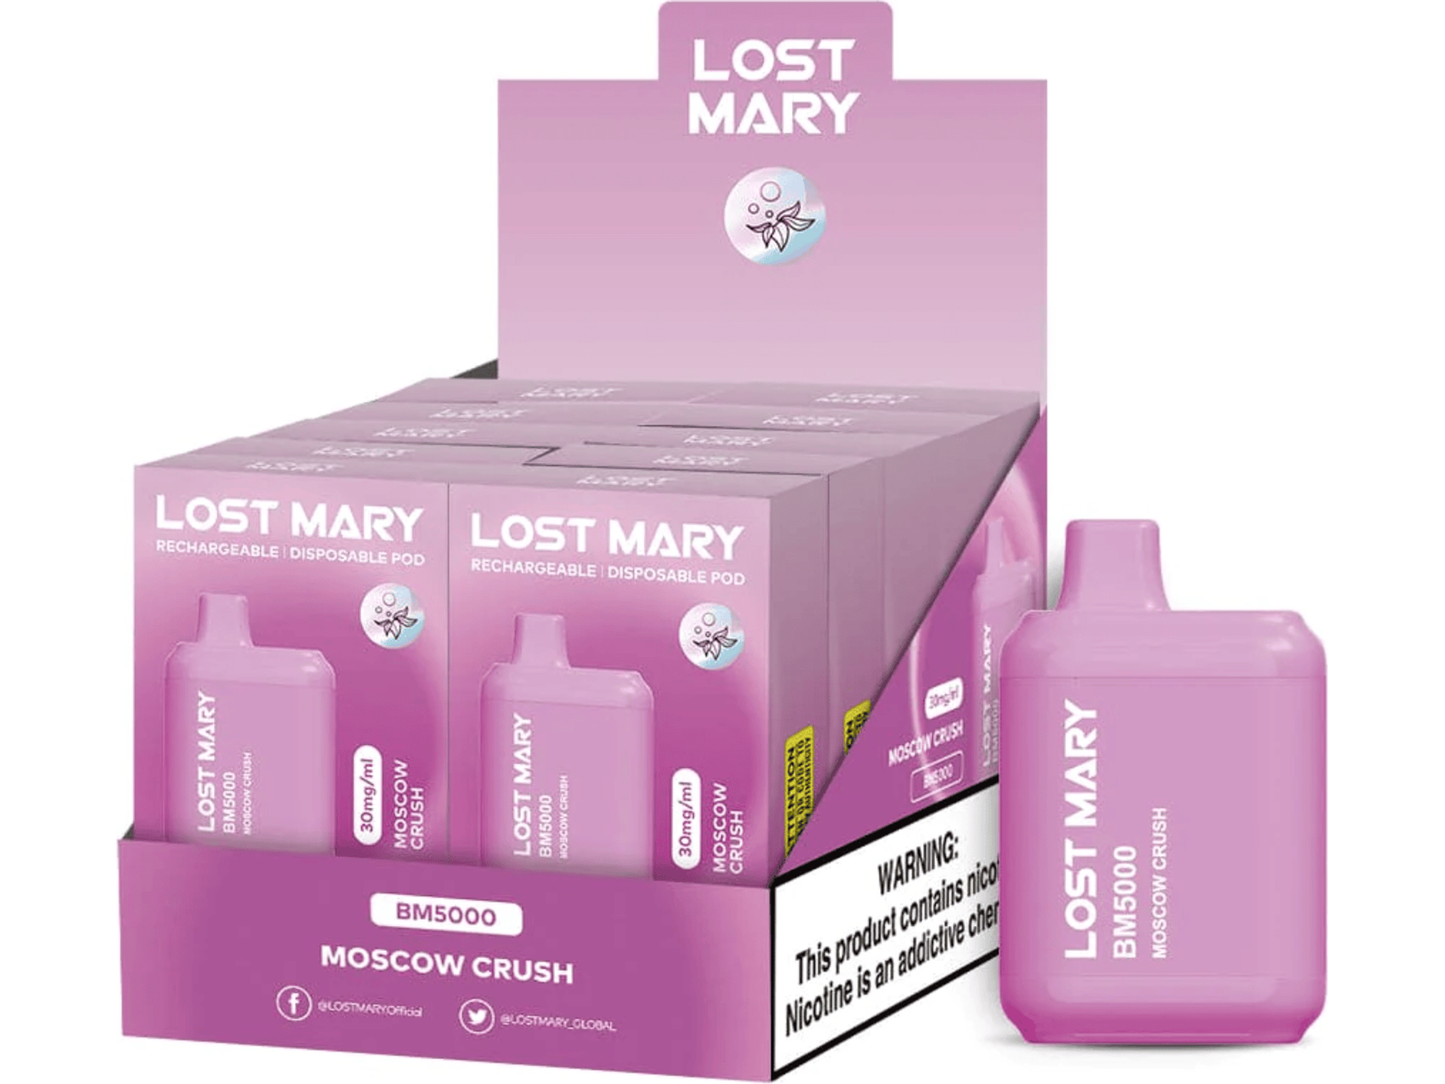 Lost Mary BM5000 Moscow Crush flavored disposable vape device and box.